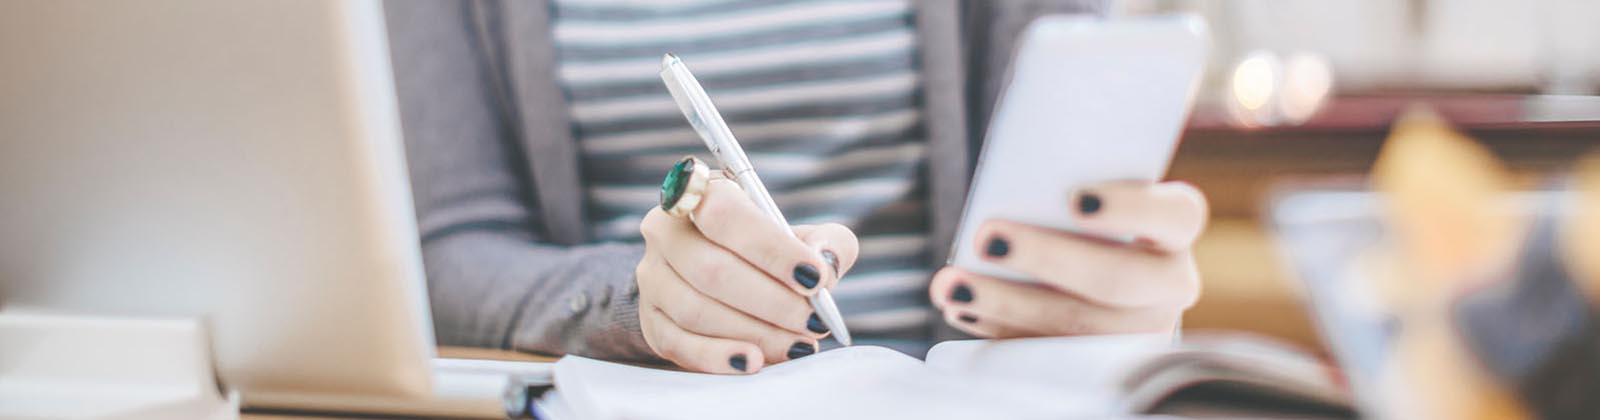 woman writing while looking at her mobile device